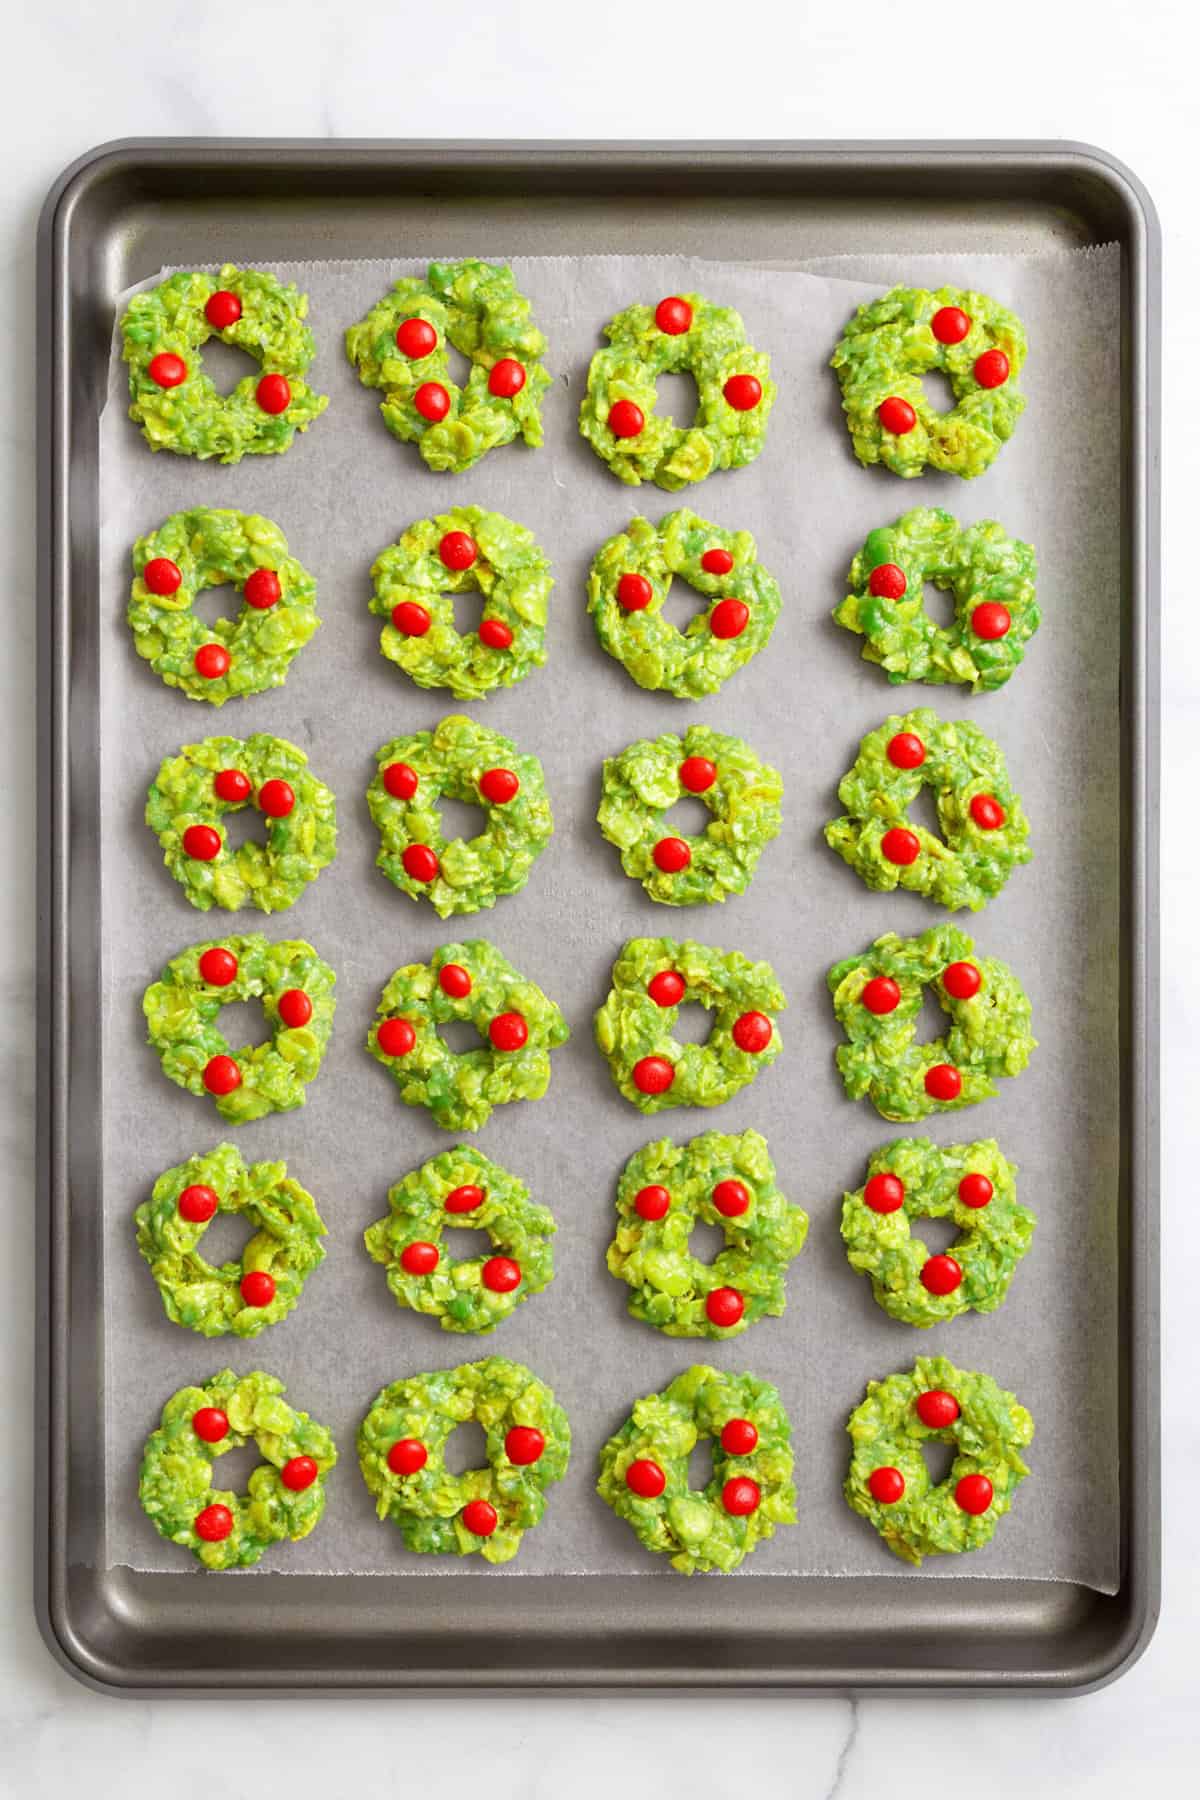 24 Christmas Wreath Cornflake Cookies arranged on a parchment-lined baking tray. 